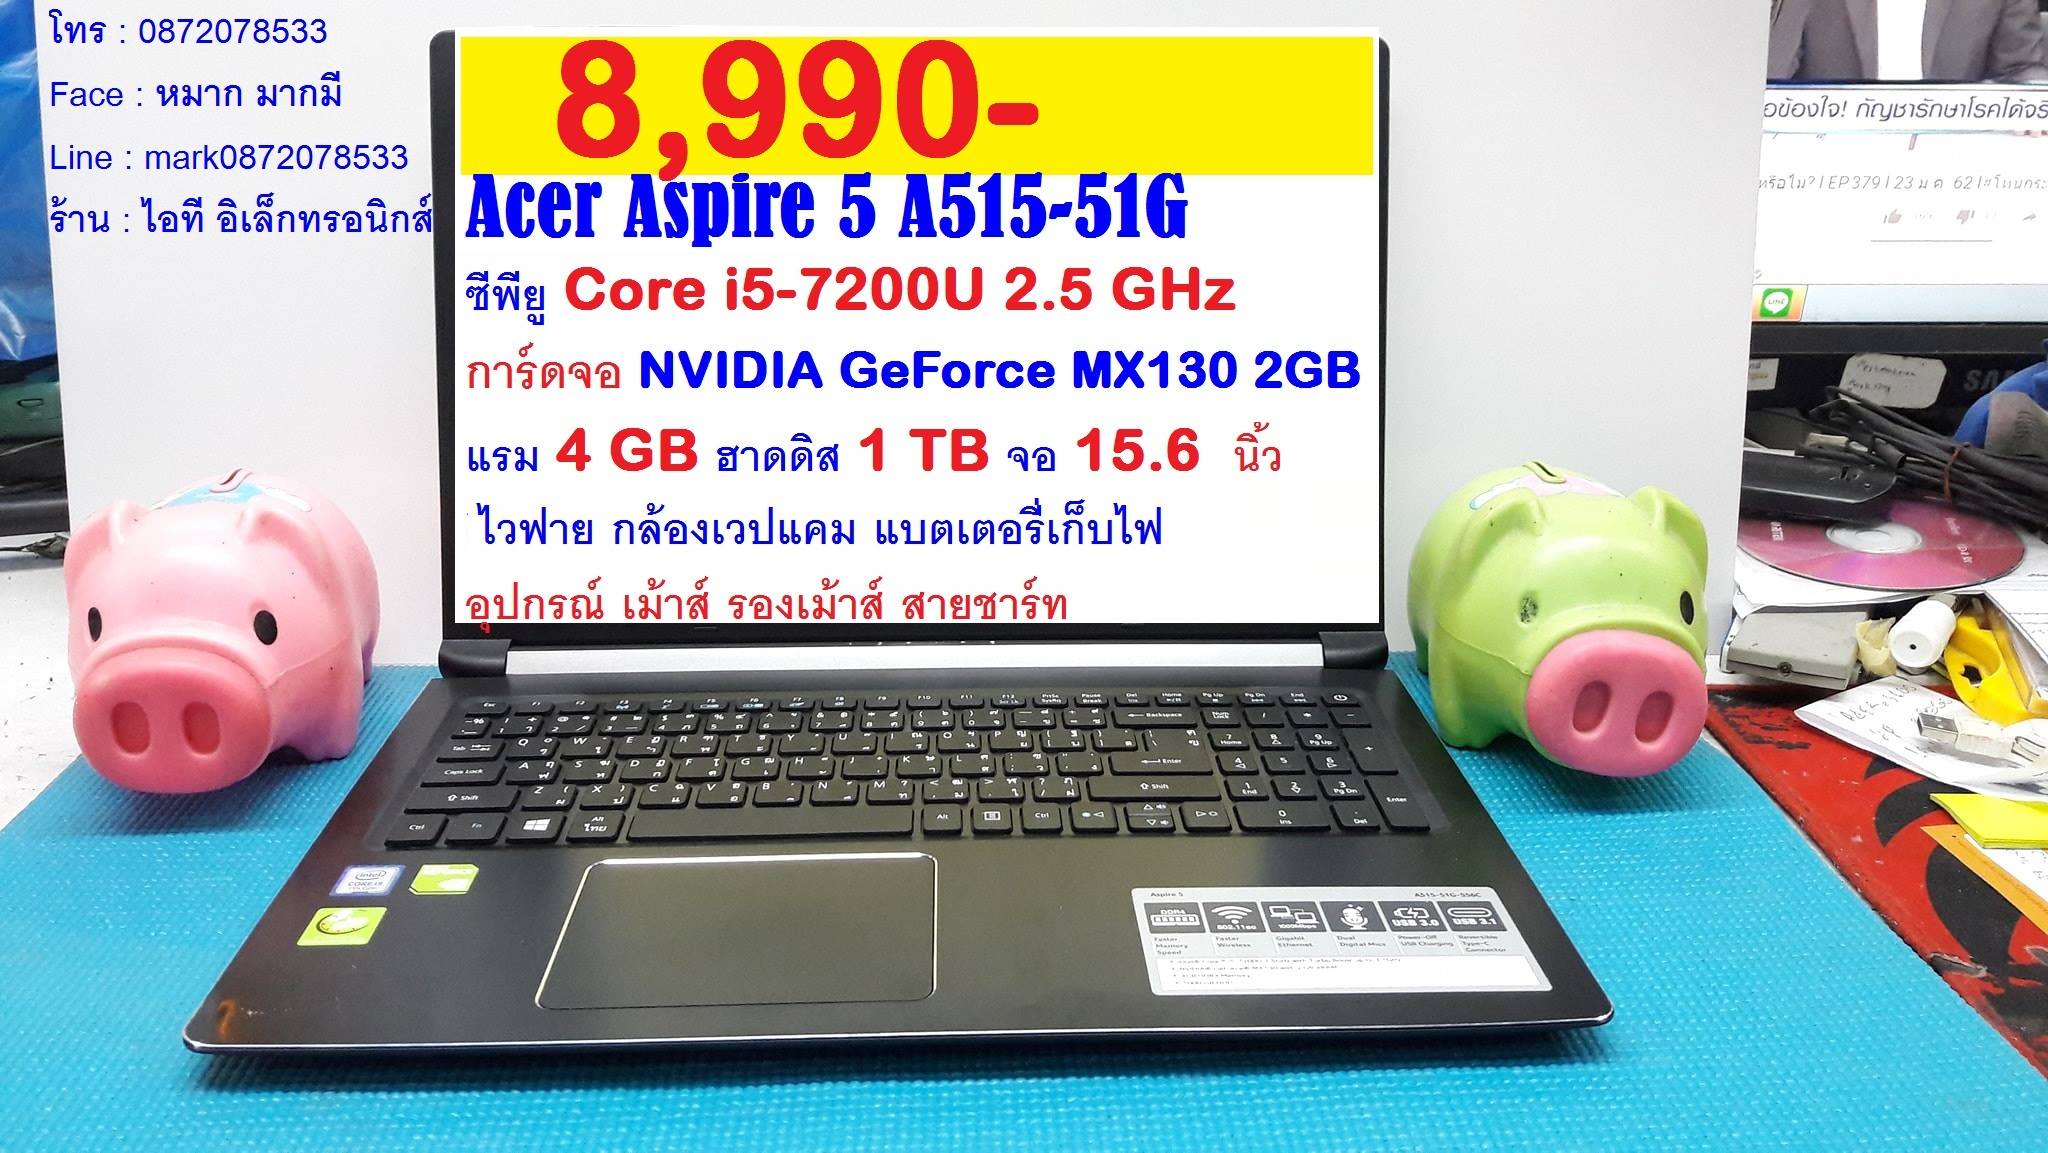 Acer Aspire 5 A515-51G  Core i5-7200U 2.5 GHz รูปที่ 1